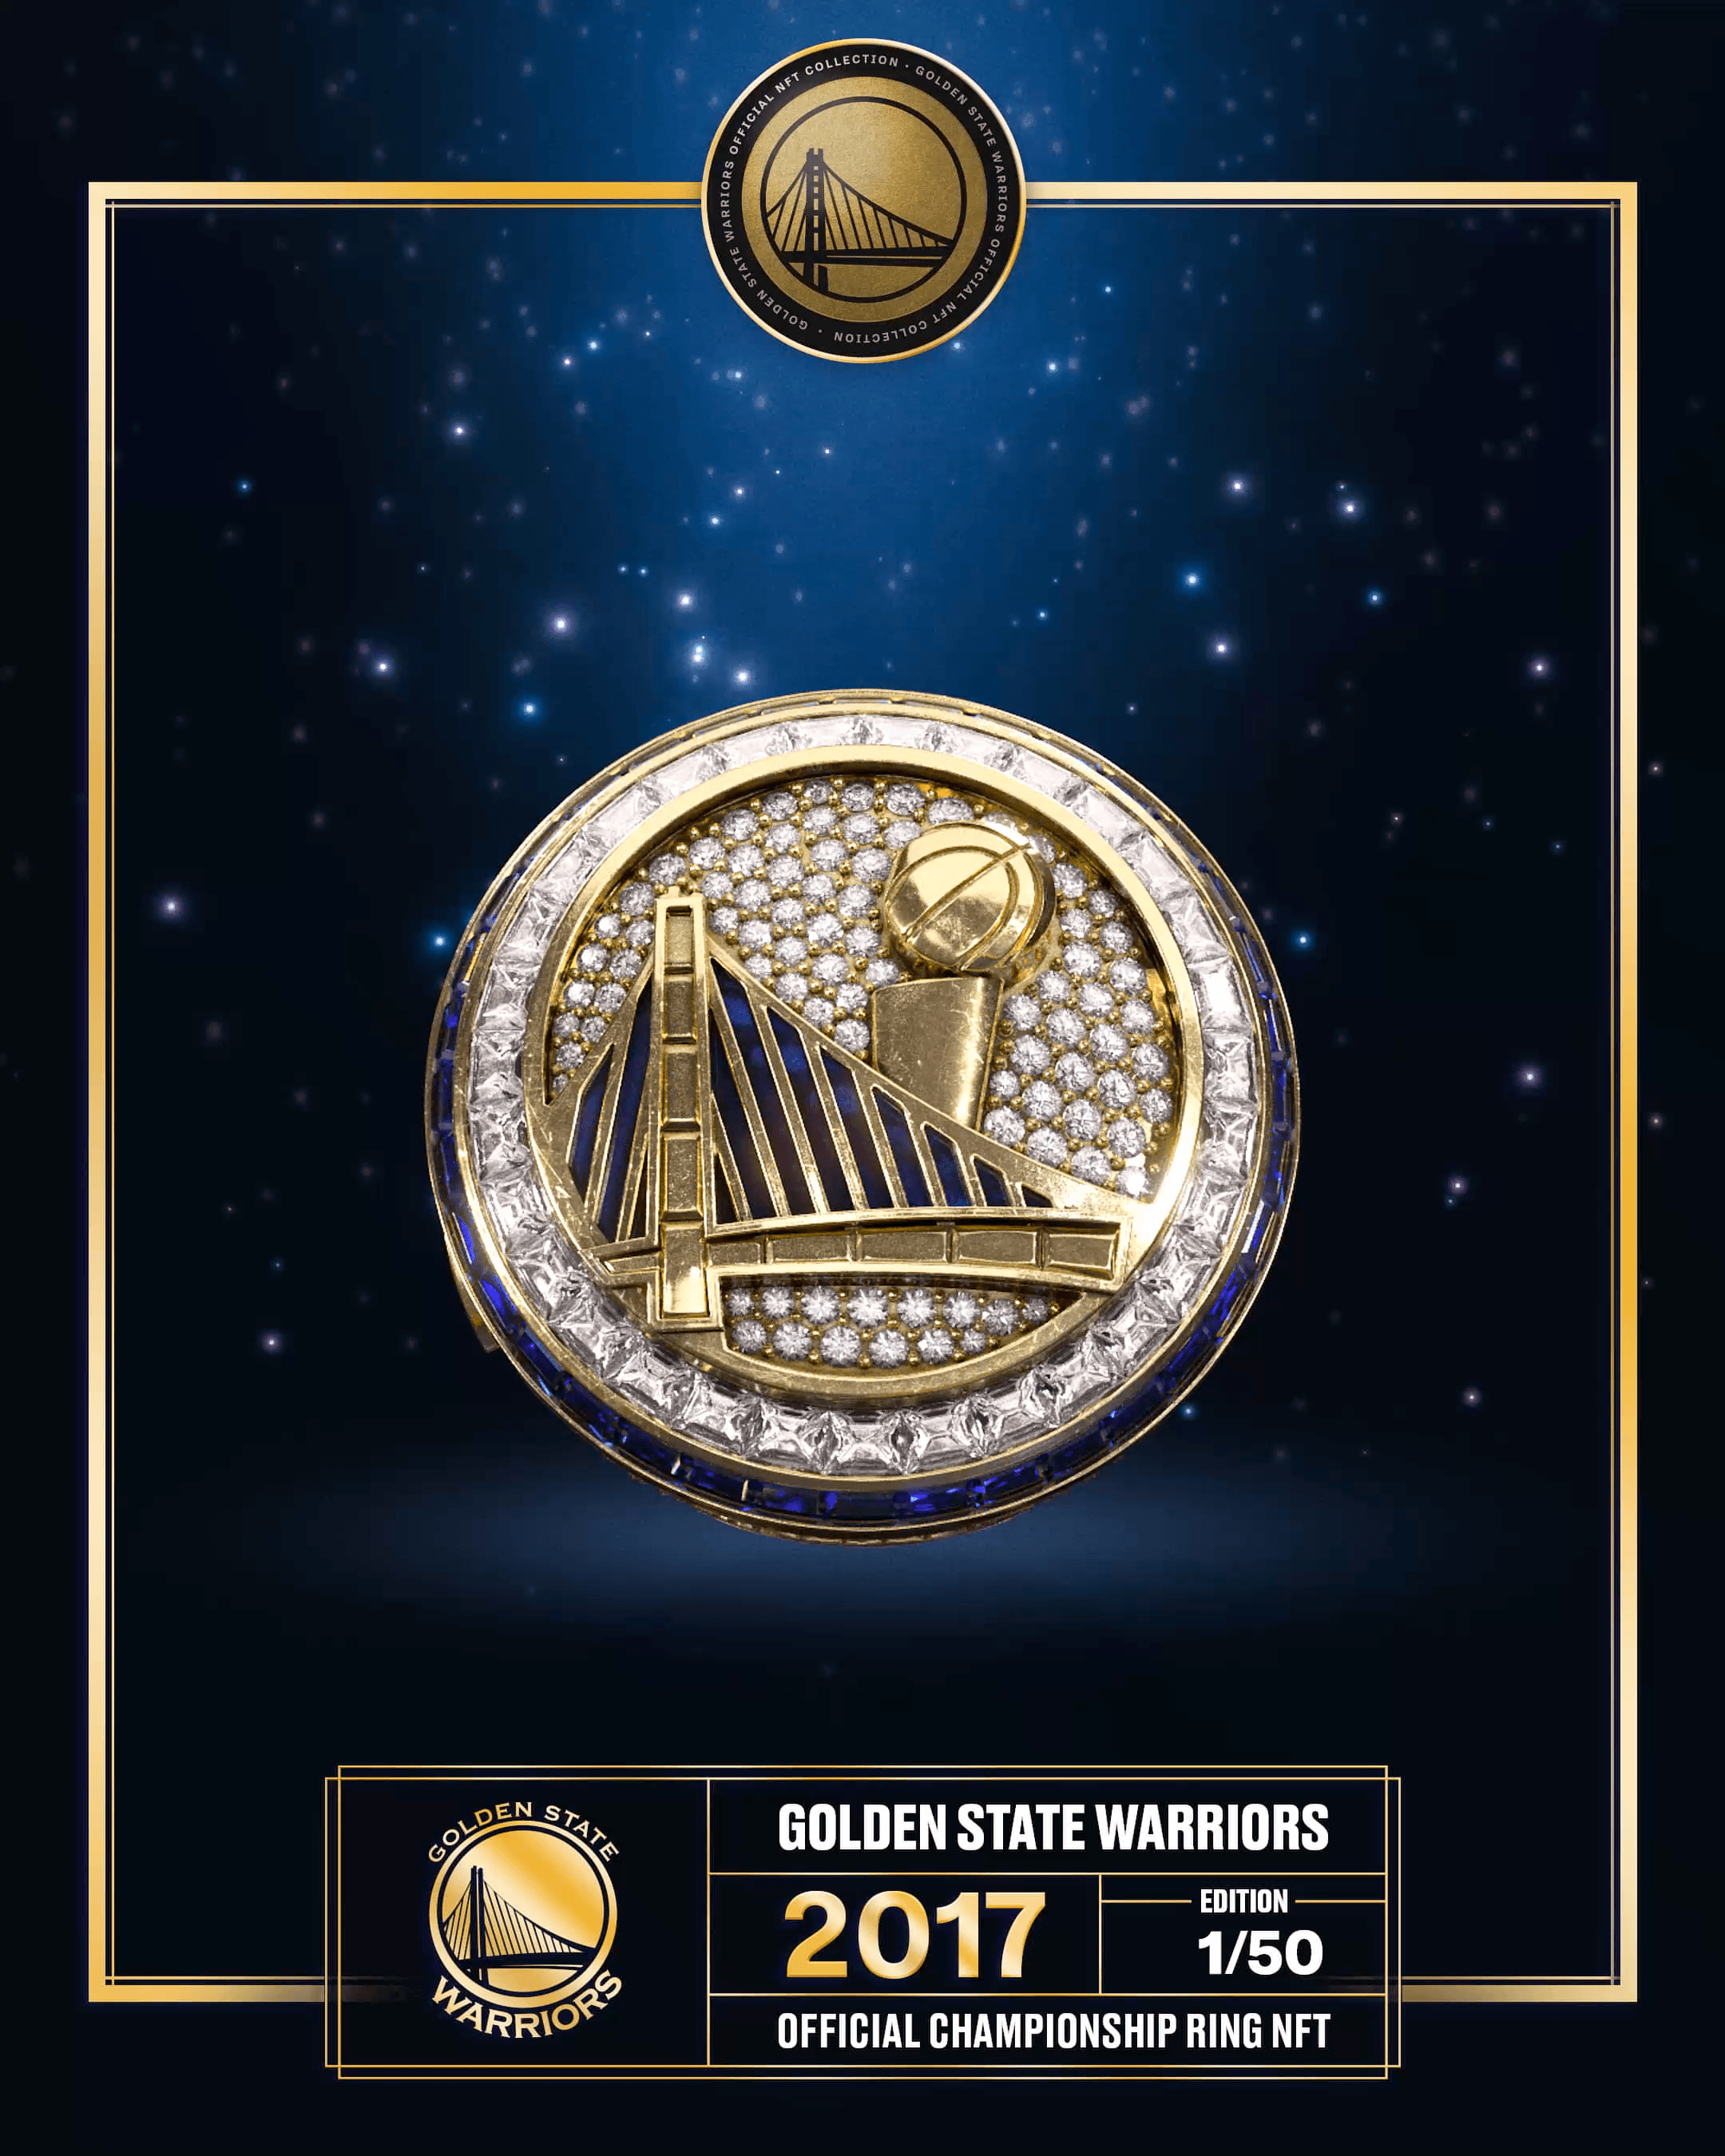 Edition 1 - 2017 Warriors Championship Ring NFT & Physical Ring (1/50)